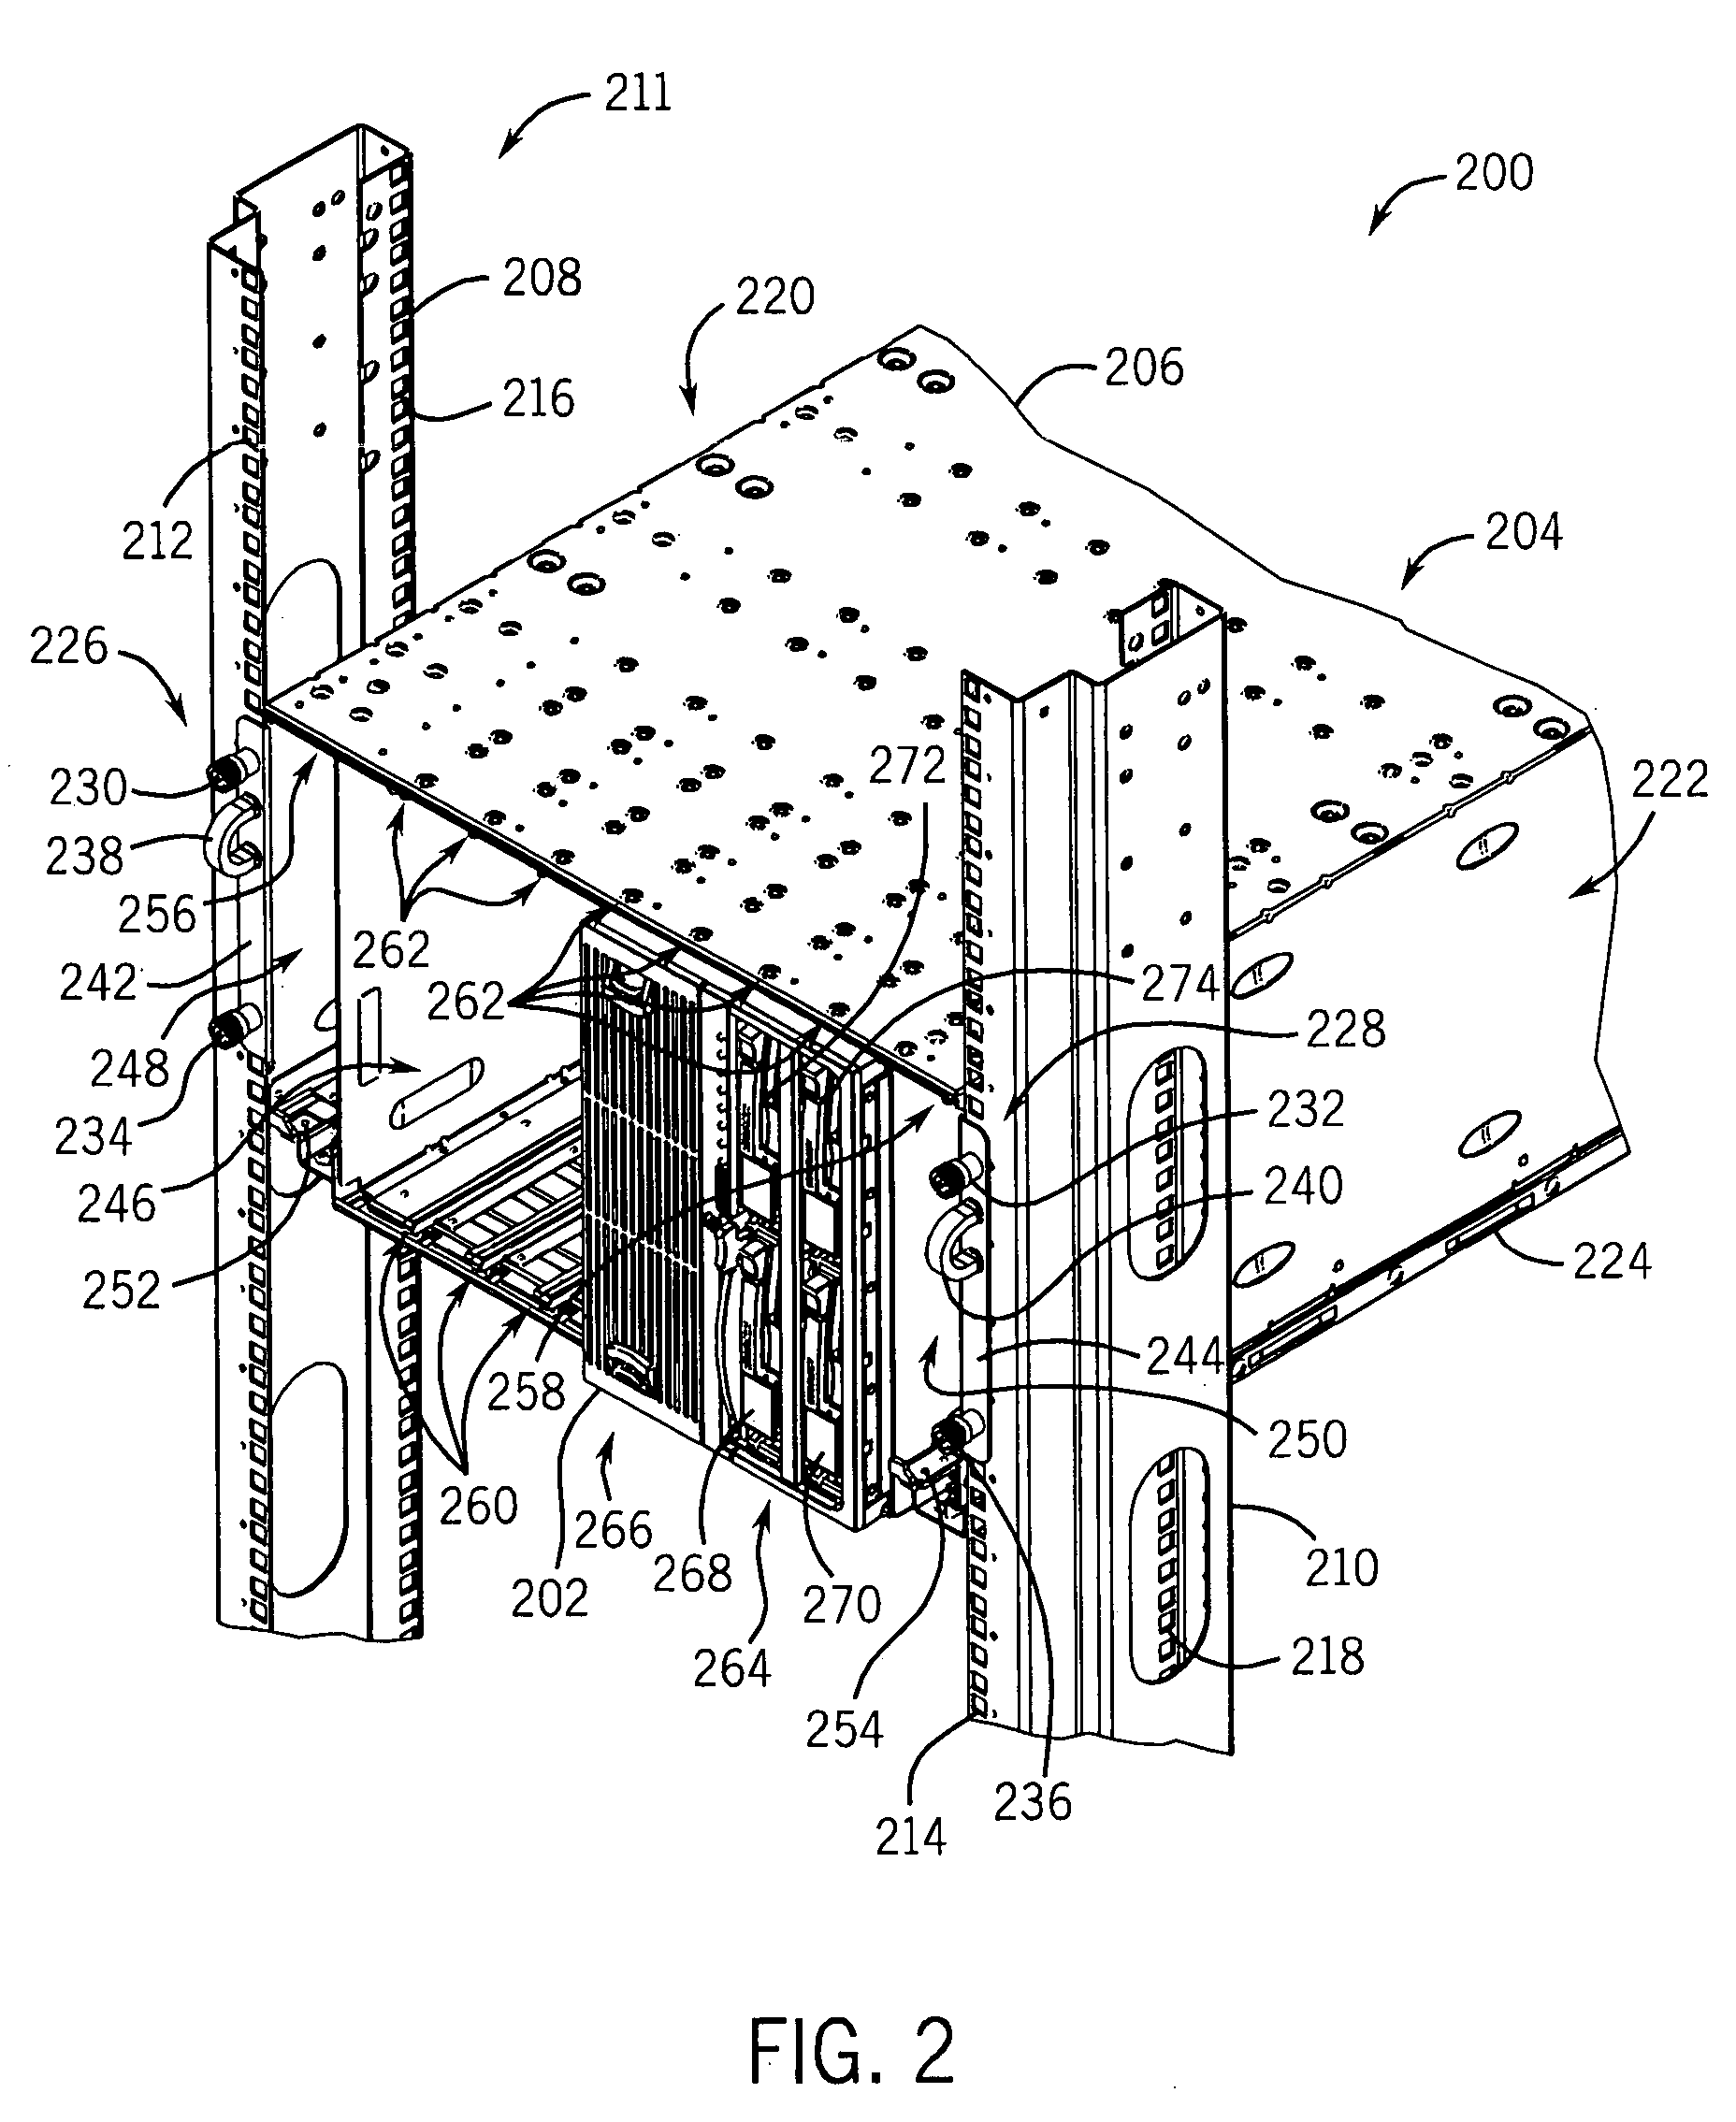 Fan tray for electronics enclosure